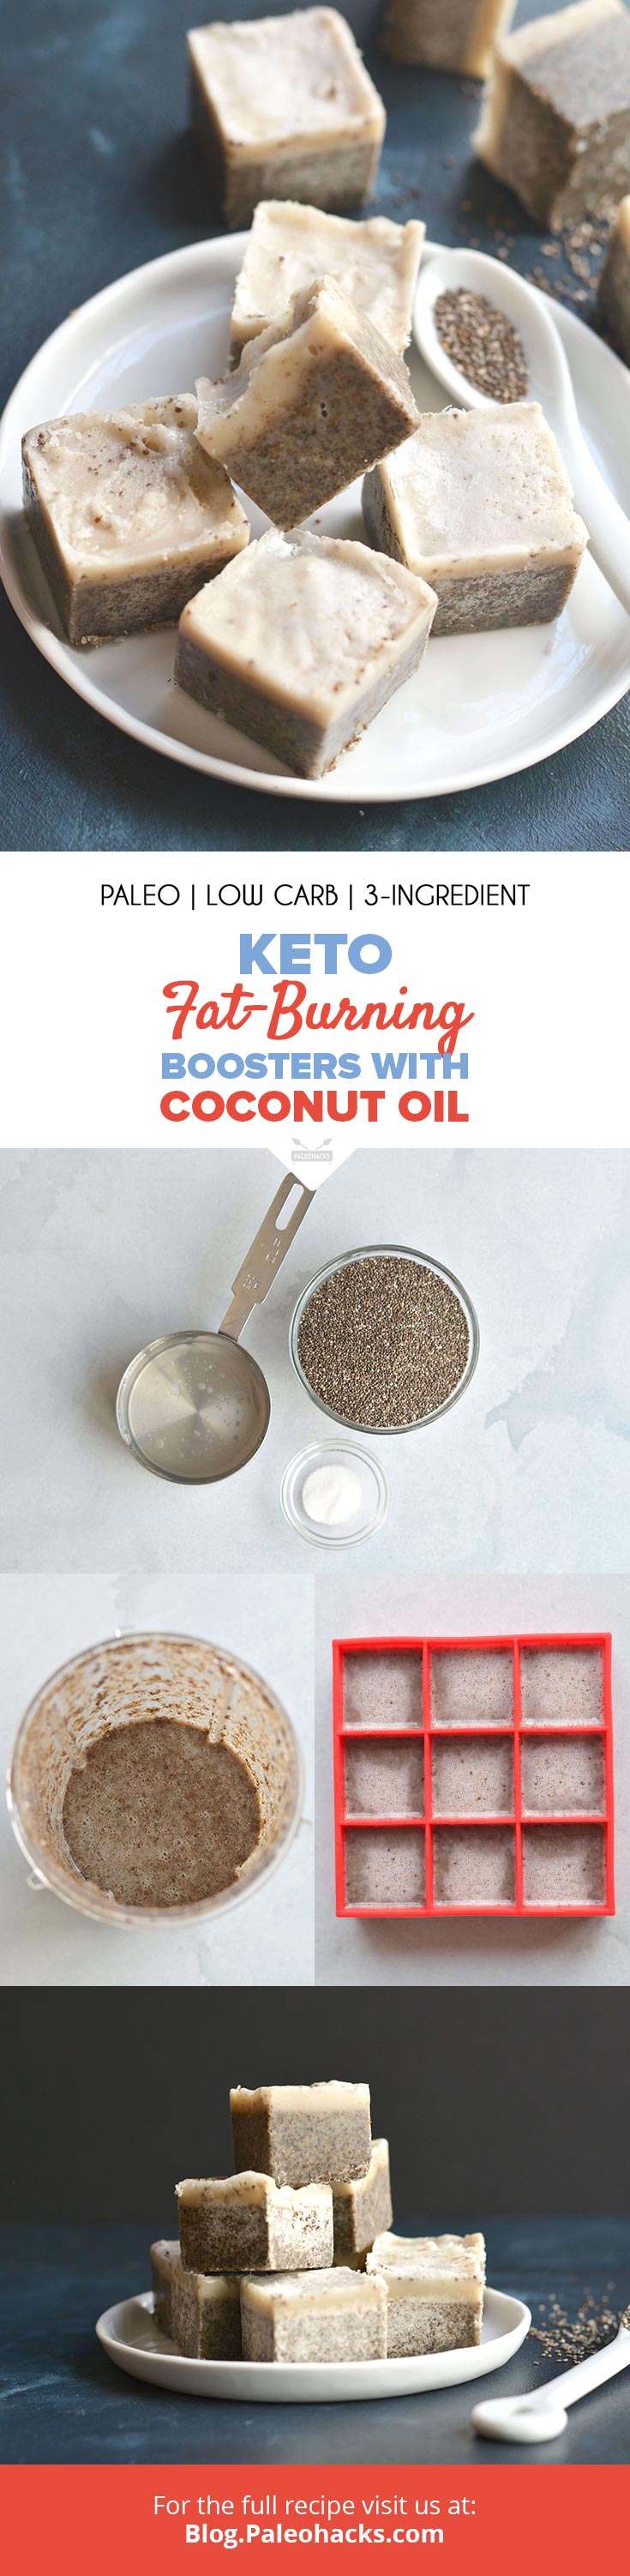 Made with coconut oil, chia seeds, and a touch of Stevia, these keto-friendly boosters are bursting with nutritional perfection.